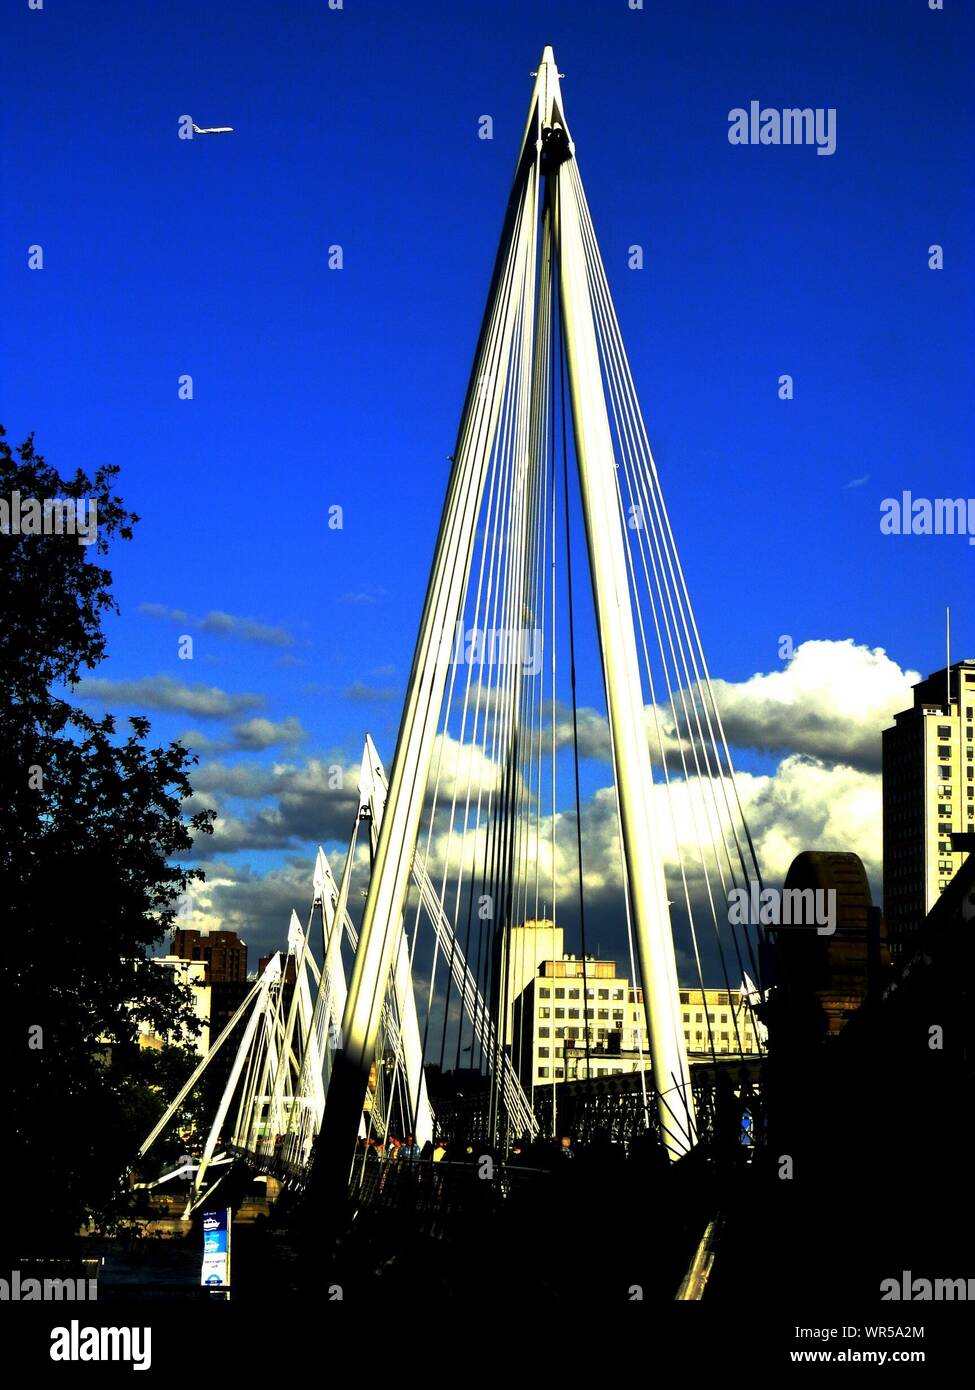 View Of Cable-stayed Bridge Stock Photo